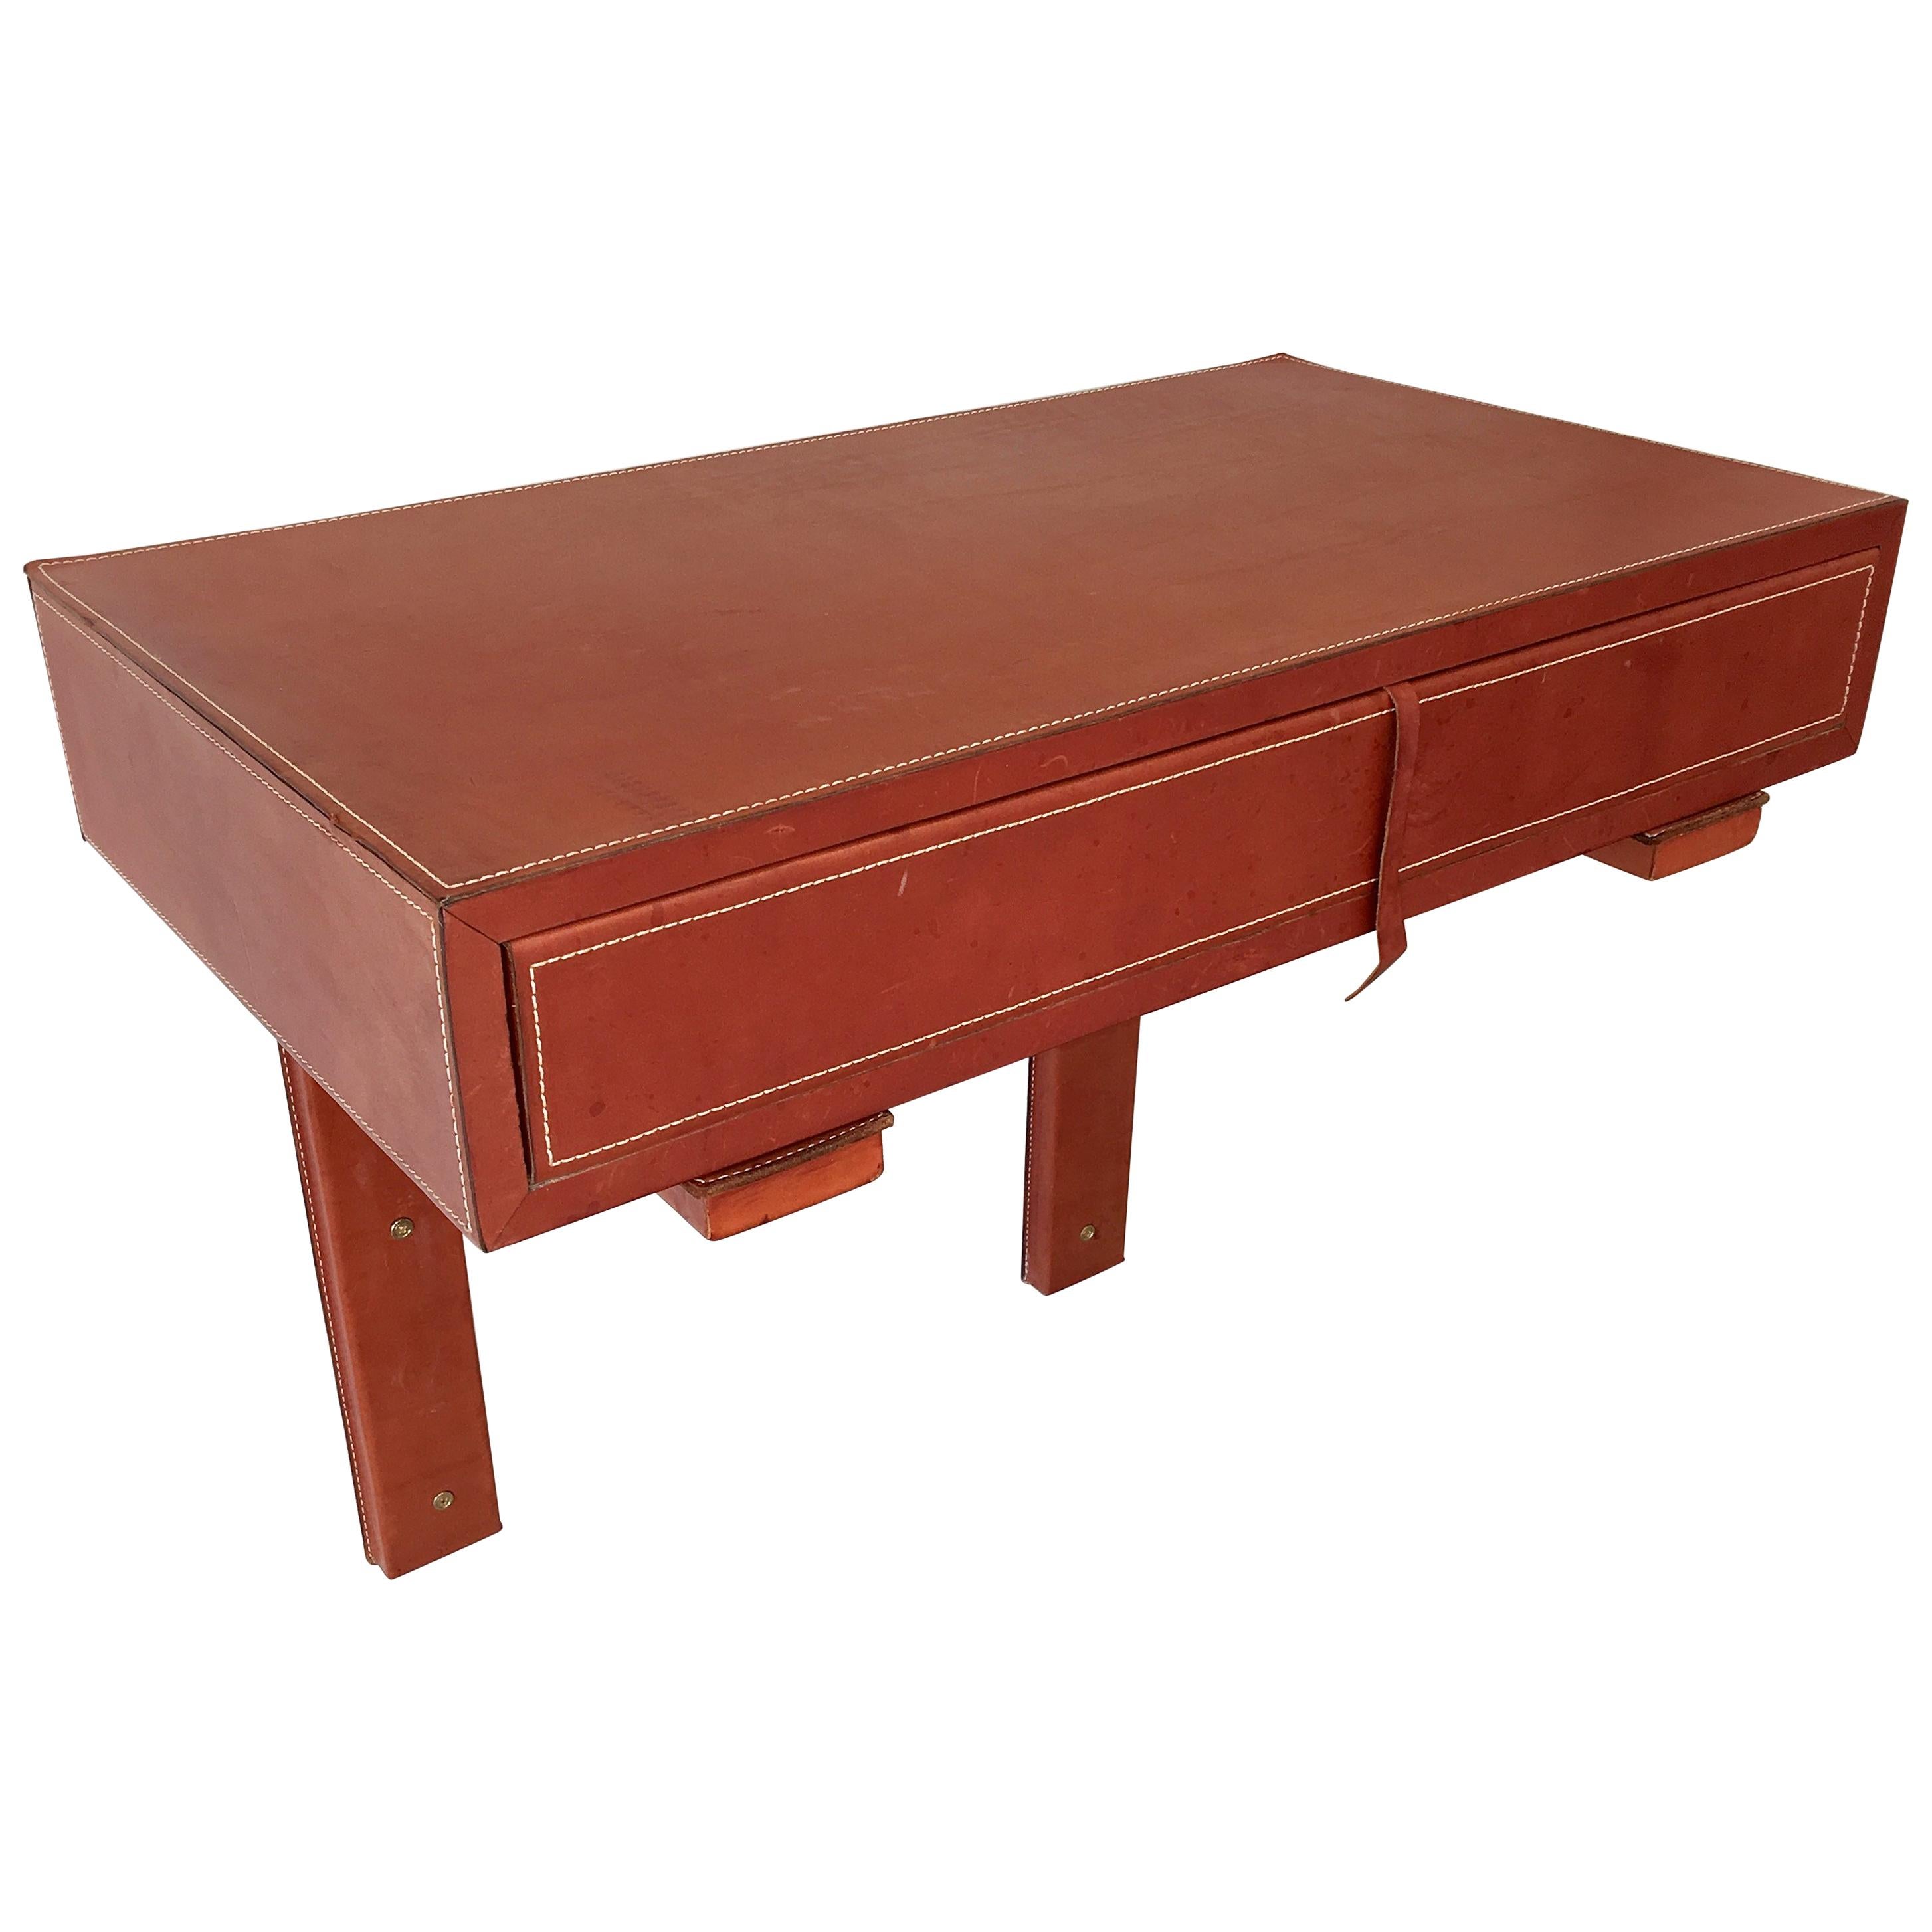 Adnet Style Saddle Stitched Leather Cantilevered Wall Console